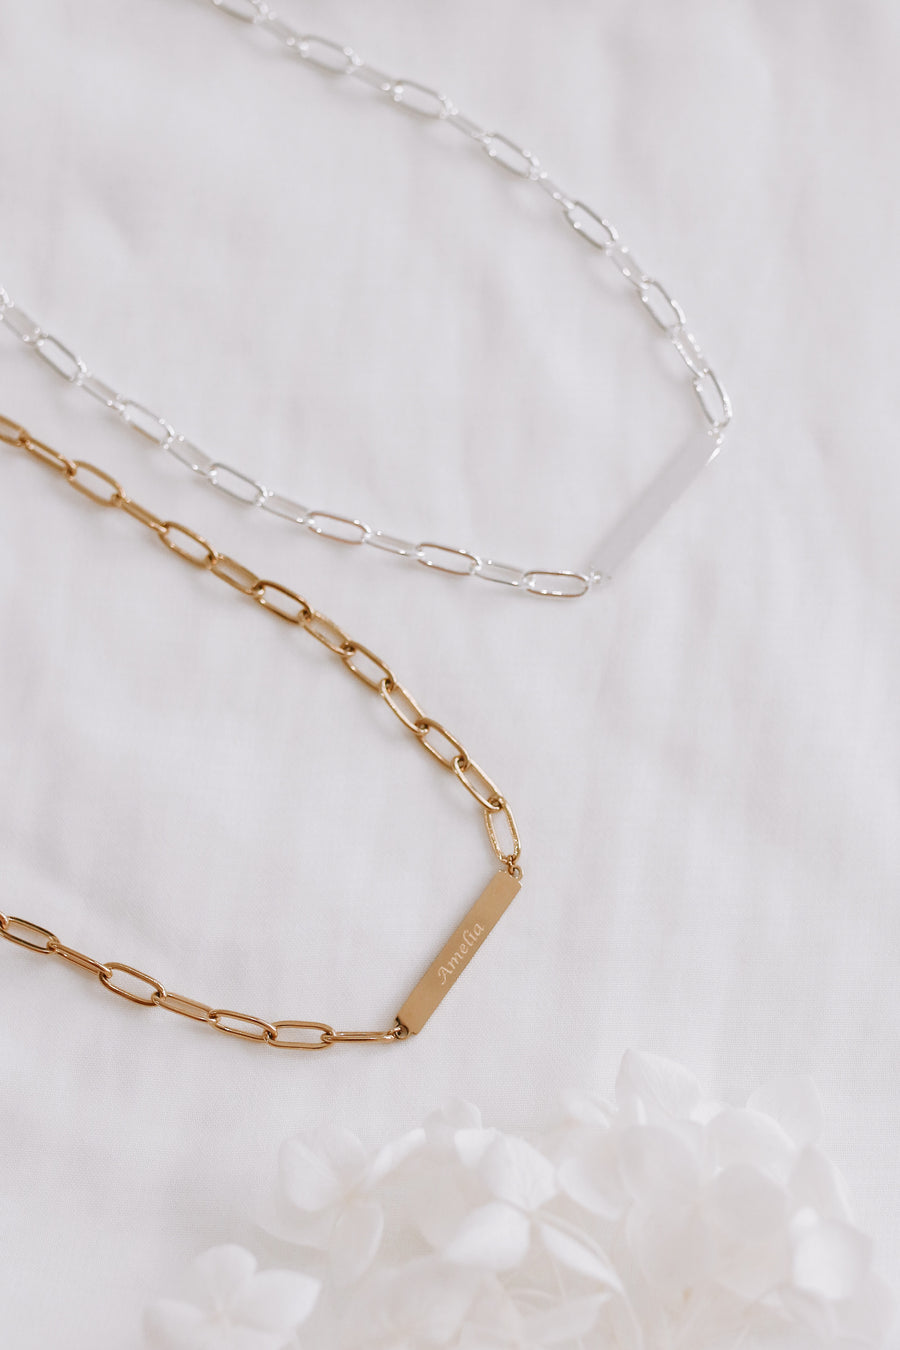 Lorelai - Stainless Steel Gold or Silver Necklace